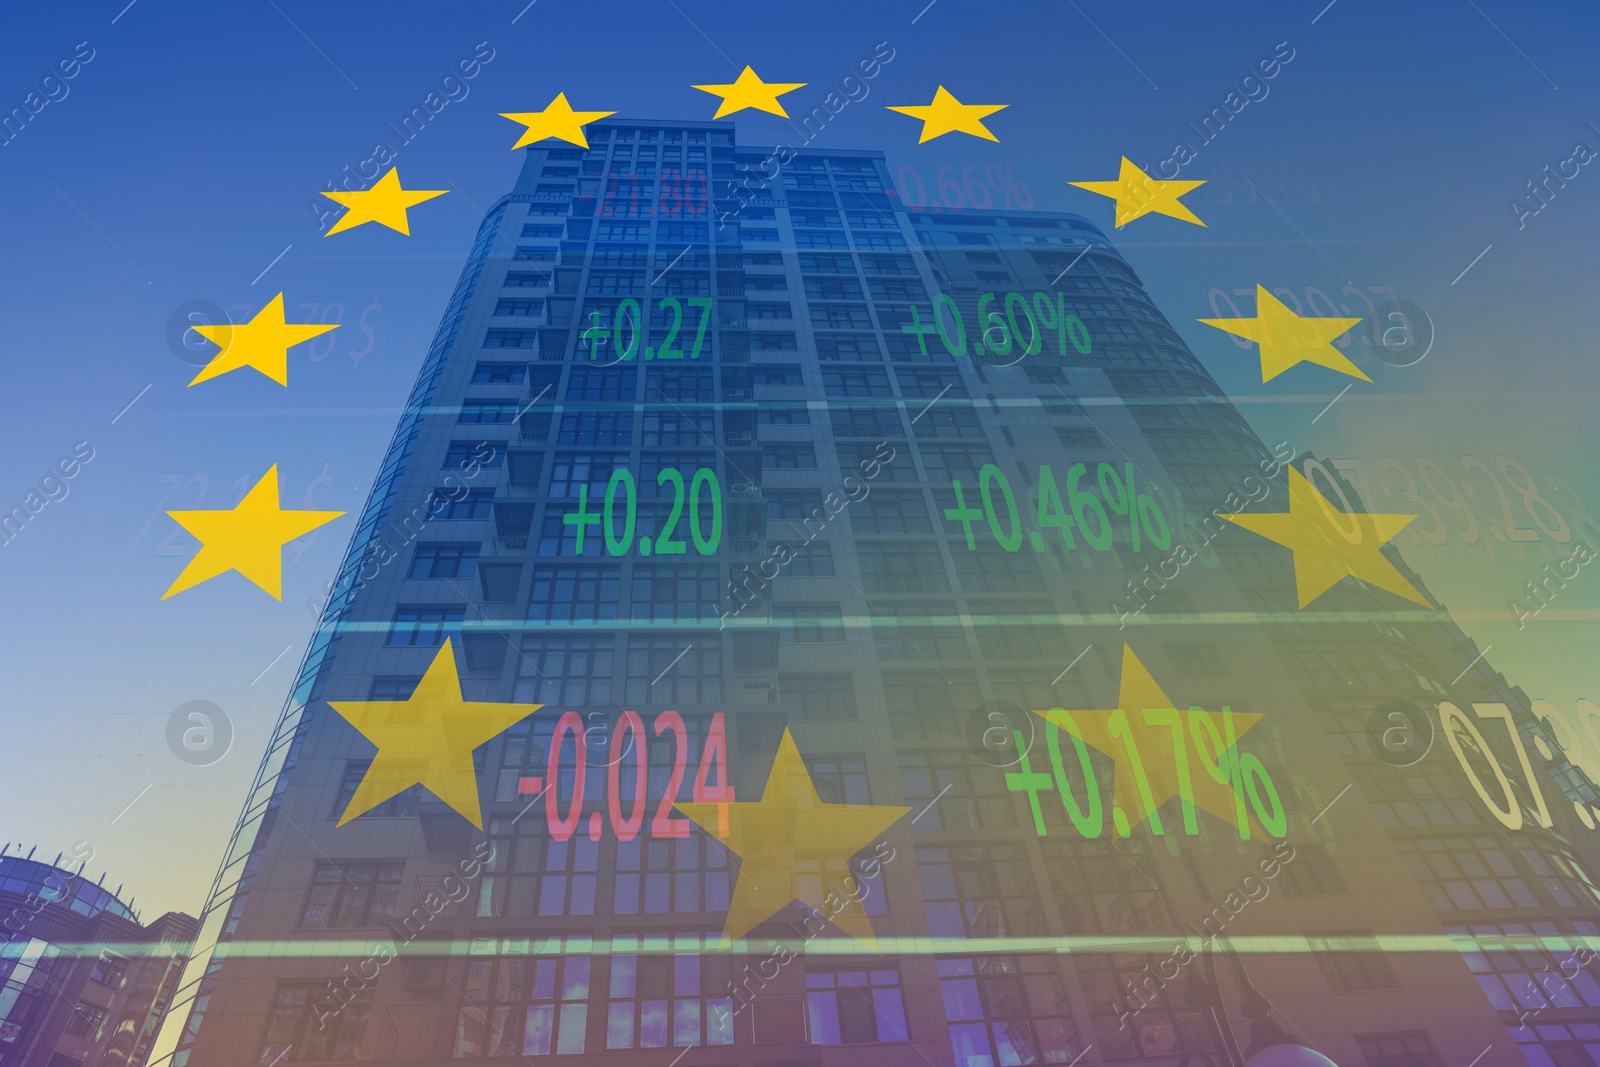 Image of Stock exchange. Multiple exposure with European flag, building and trading data